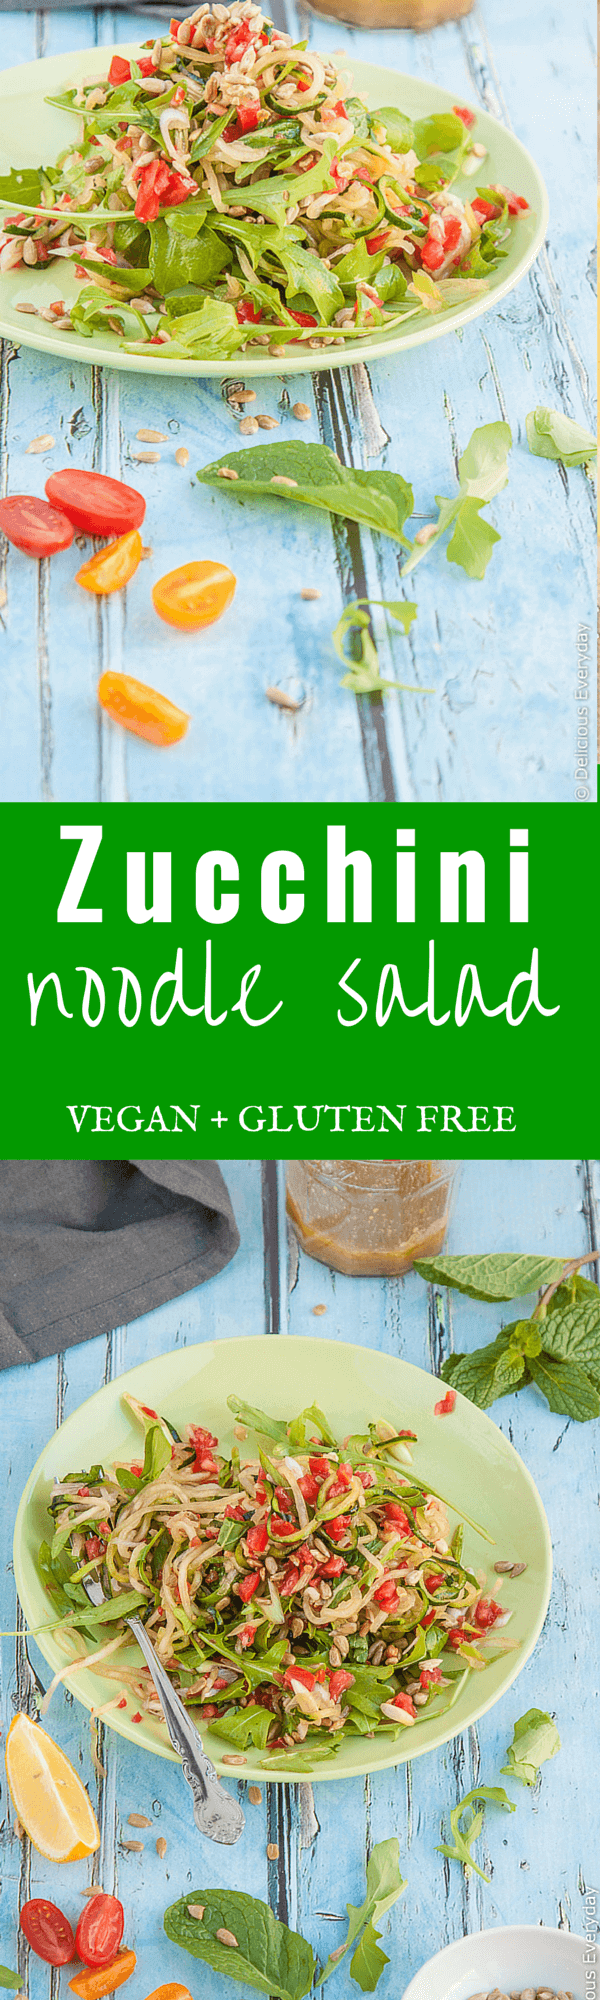 Zucchini Noodle Recipe - this vegan salad is packed full of veggie goodness with zucchini noodles, tomato, mint and more. | Get the recipe at DeliciousEveryday.com